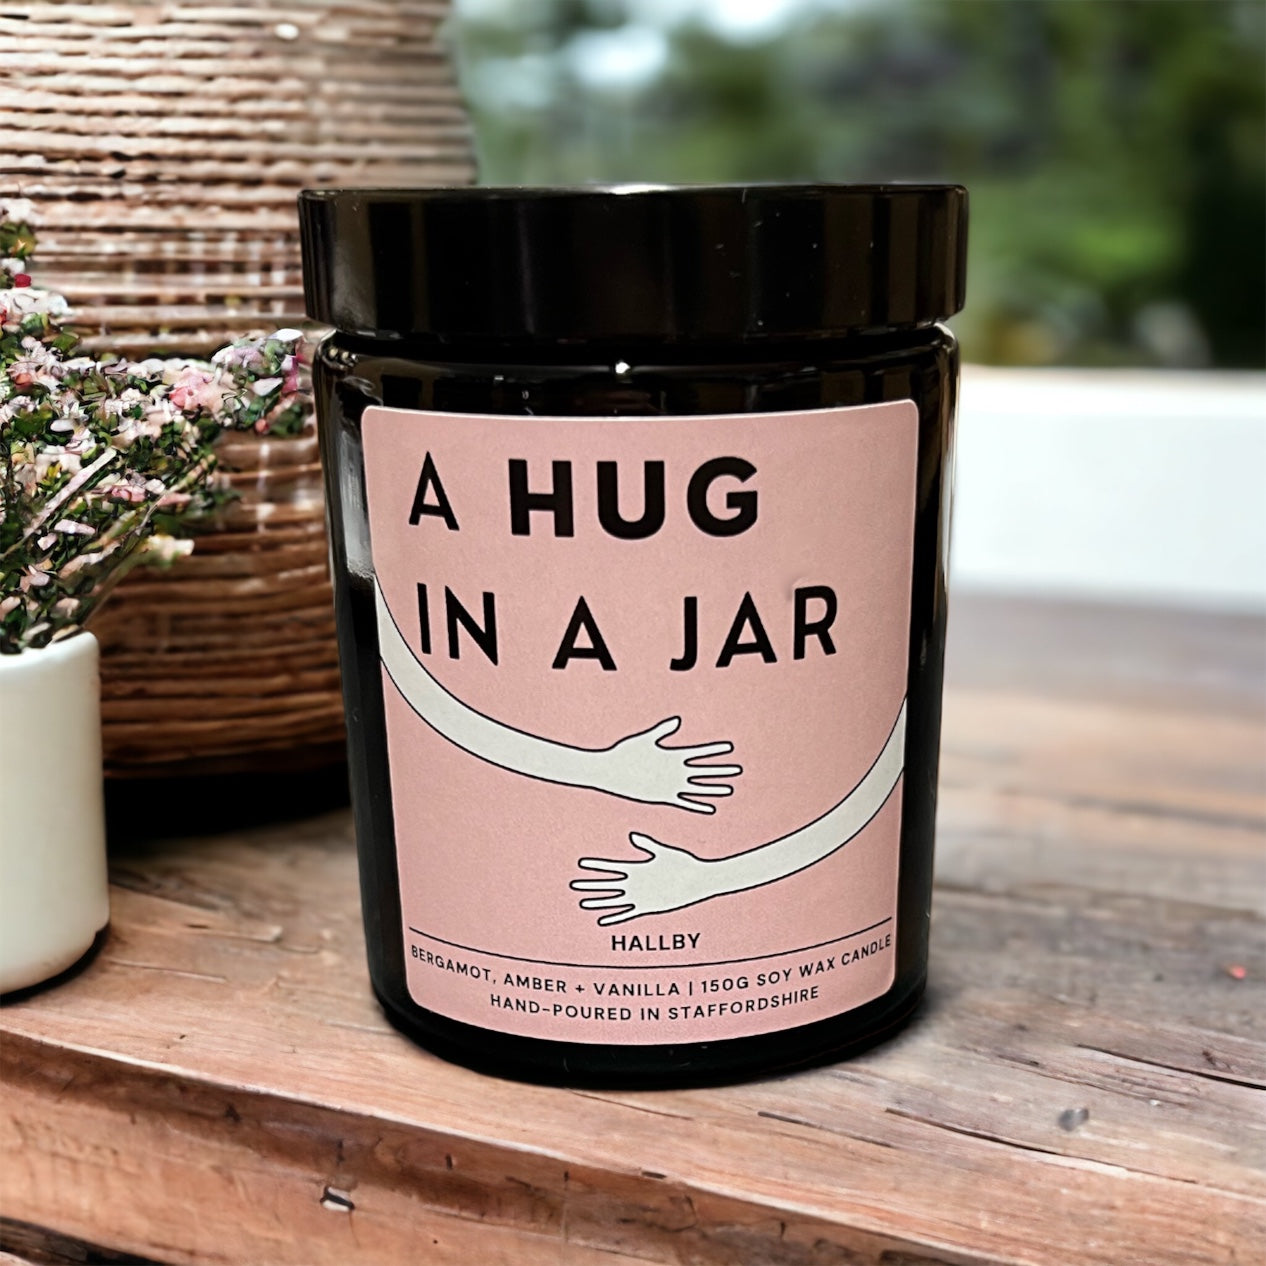 Hug in a jar scented gifting candle